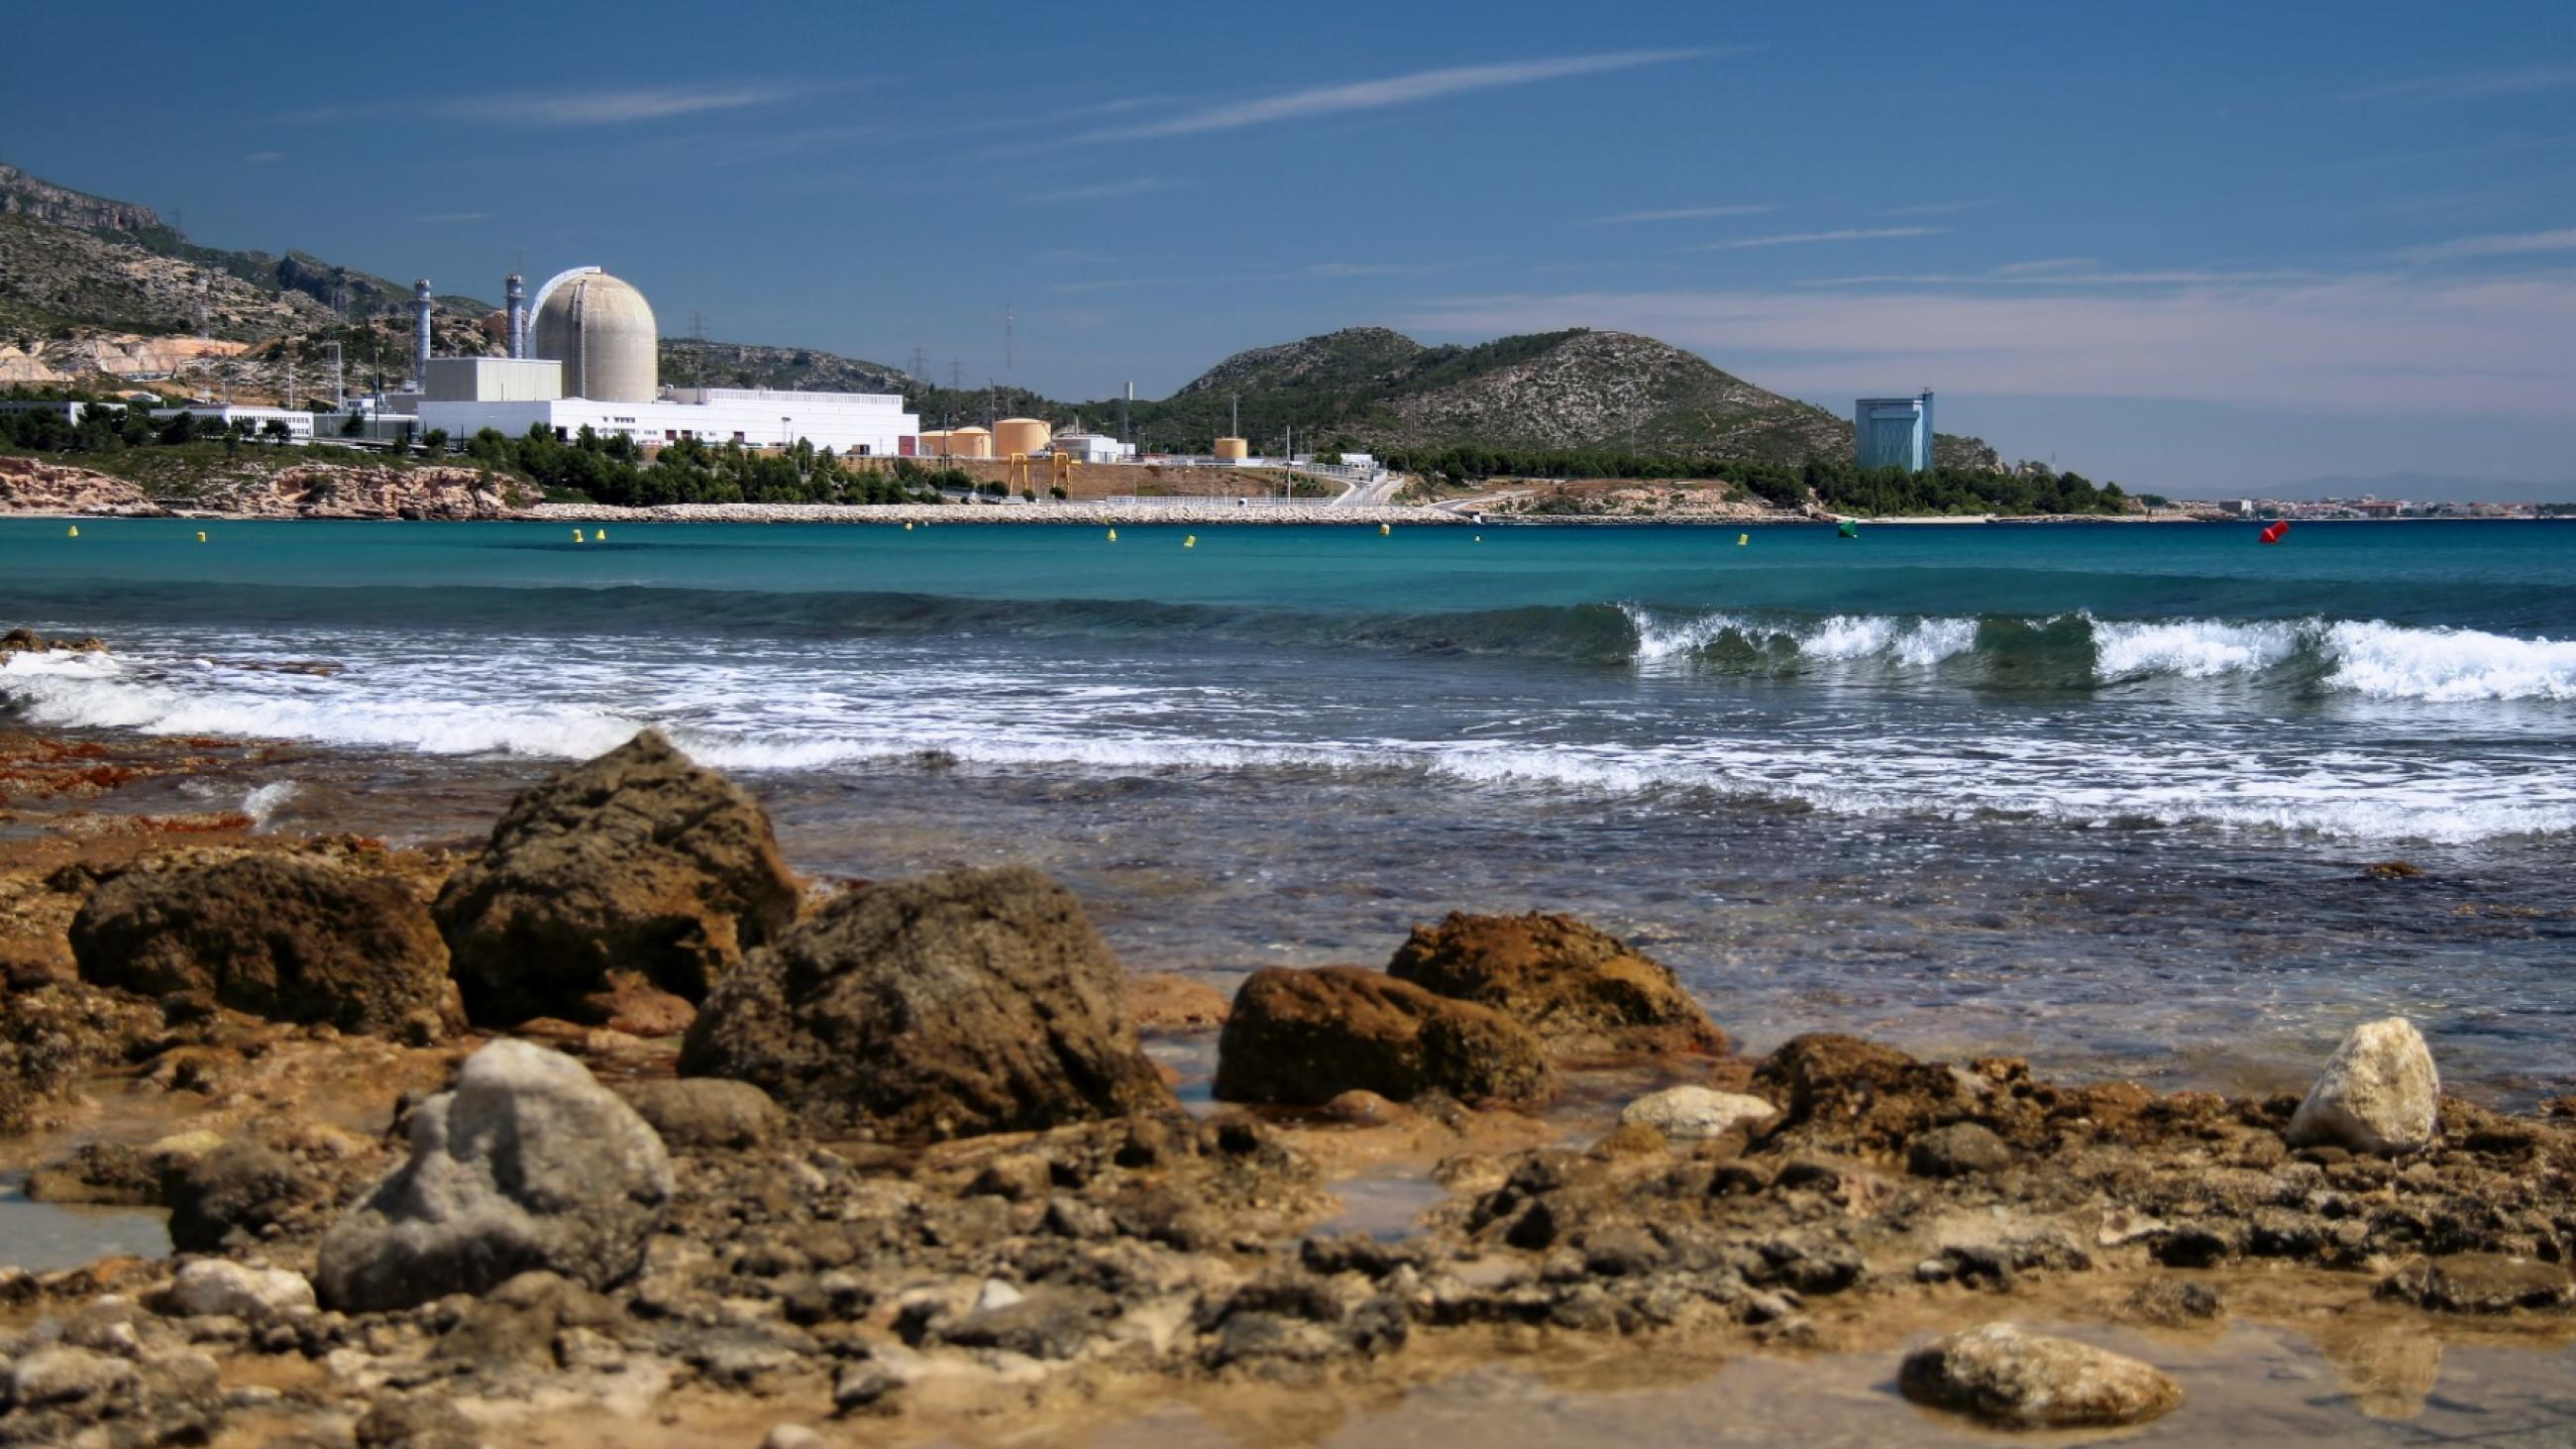 A view from a rocky beach on Spain's coastline. Across a crescent of turquoise ocean, waves cresting with white foam, can be seen the Vandellos II nuclear power plant sitting between green hills